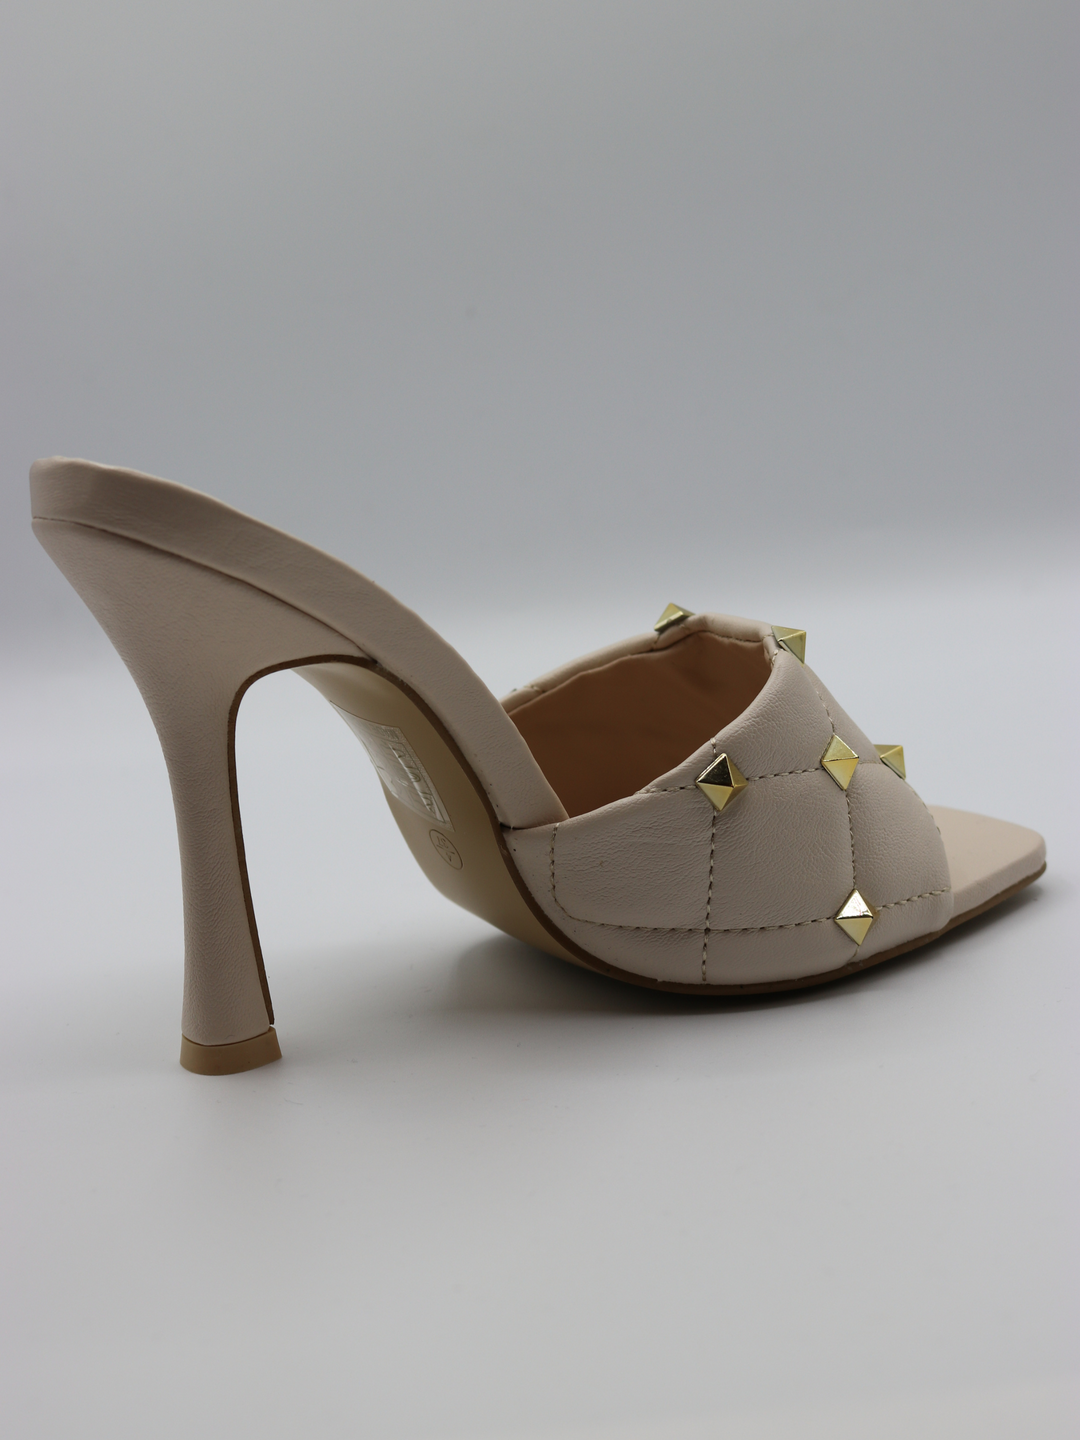 Cream quilted faux leather mule heels with gold studded heels. The side of the shoe  is visible. 